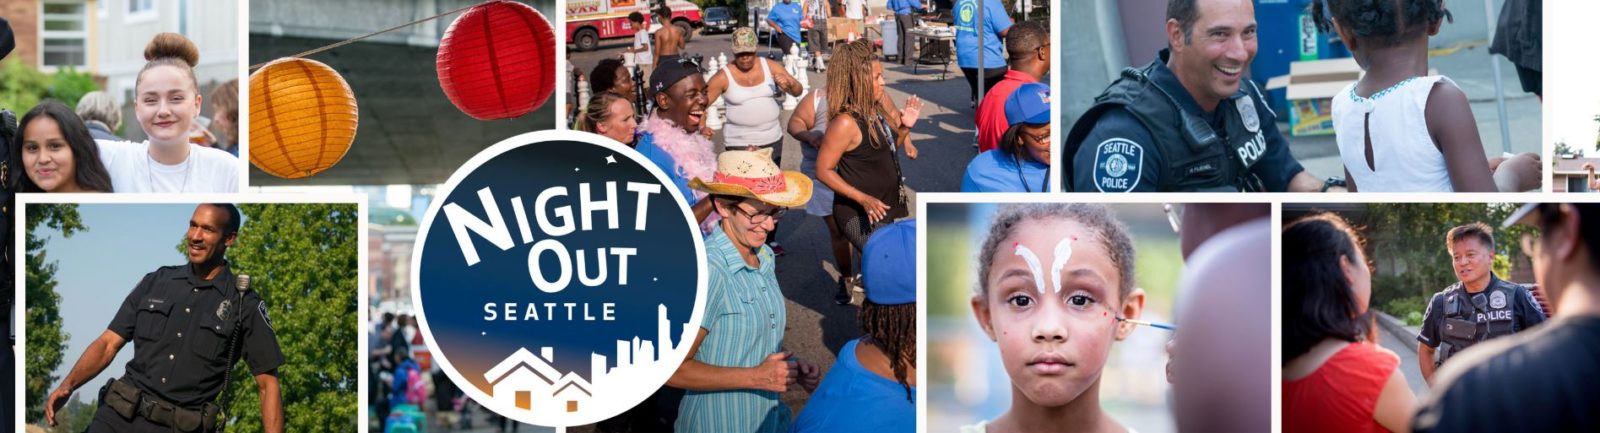 collection of community gathering photos that appear on the top of the Seattle Night Out webpage on the Seattle Police Department website